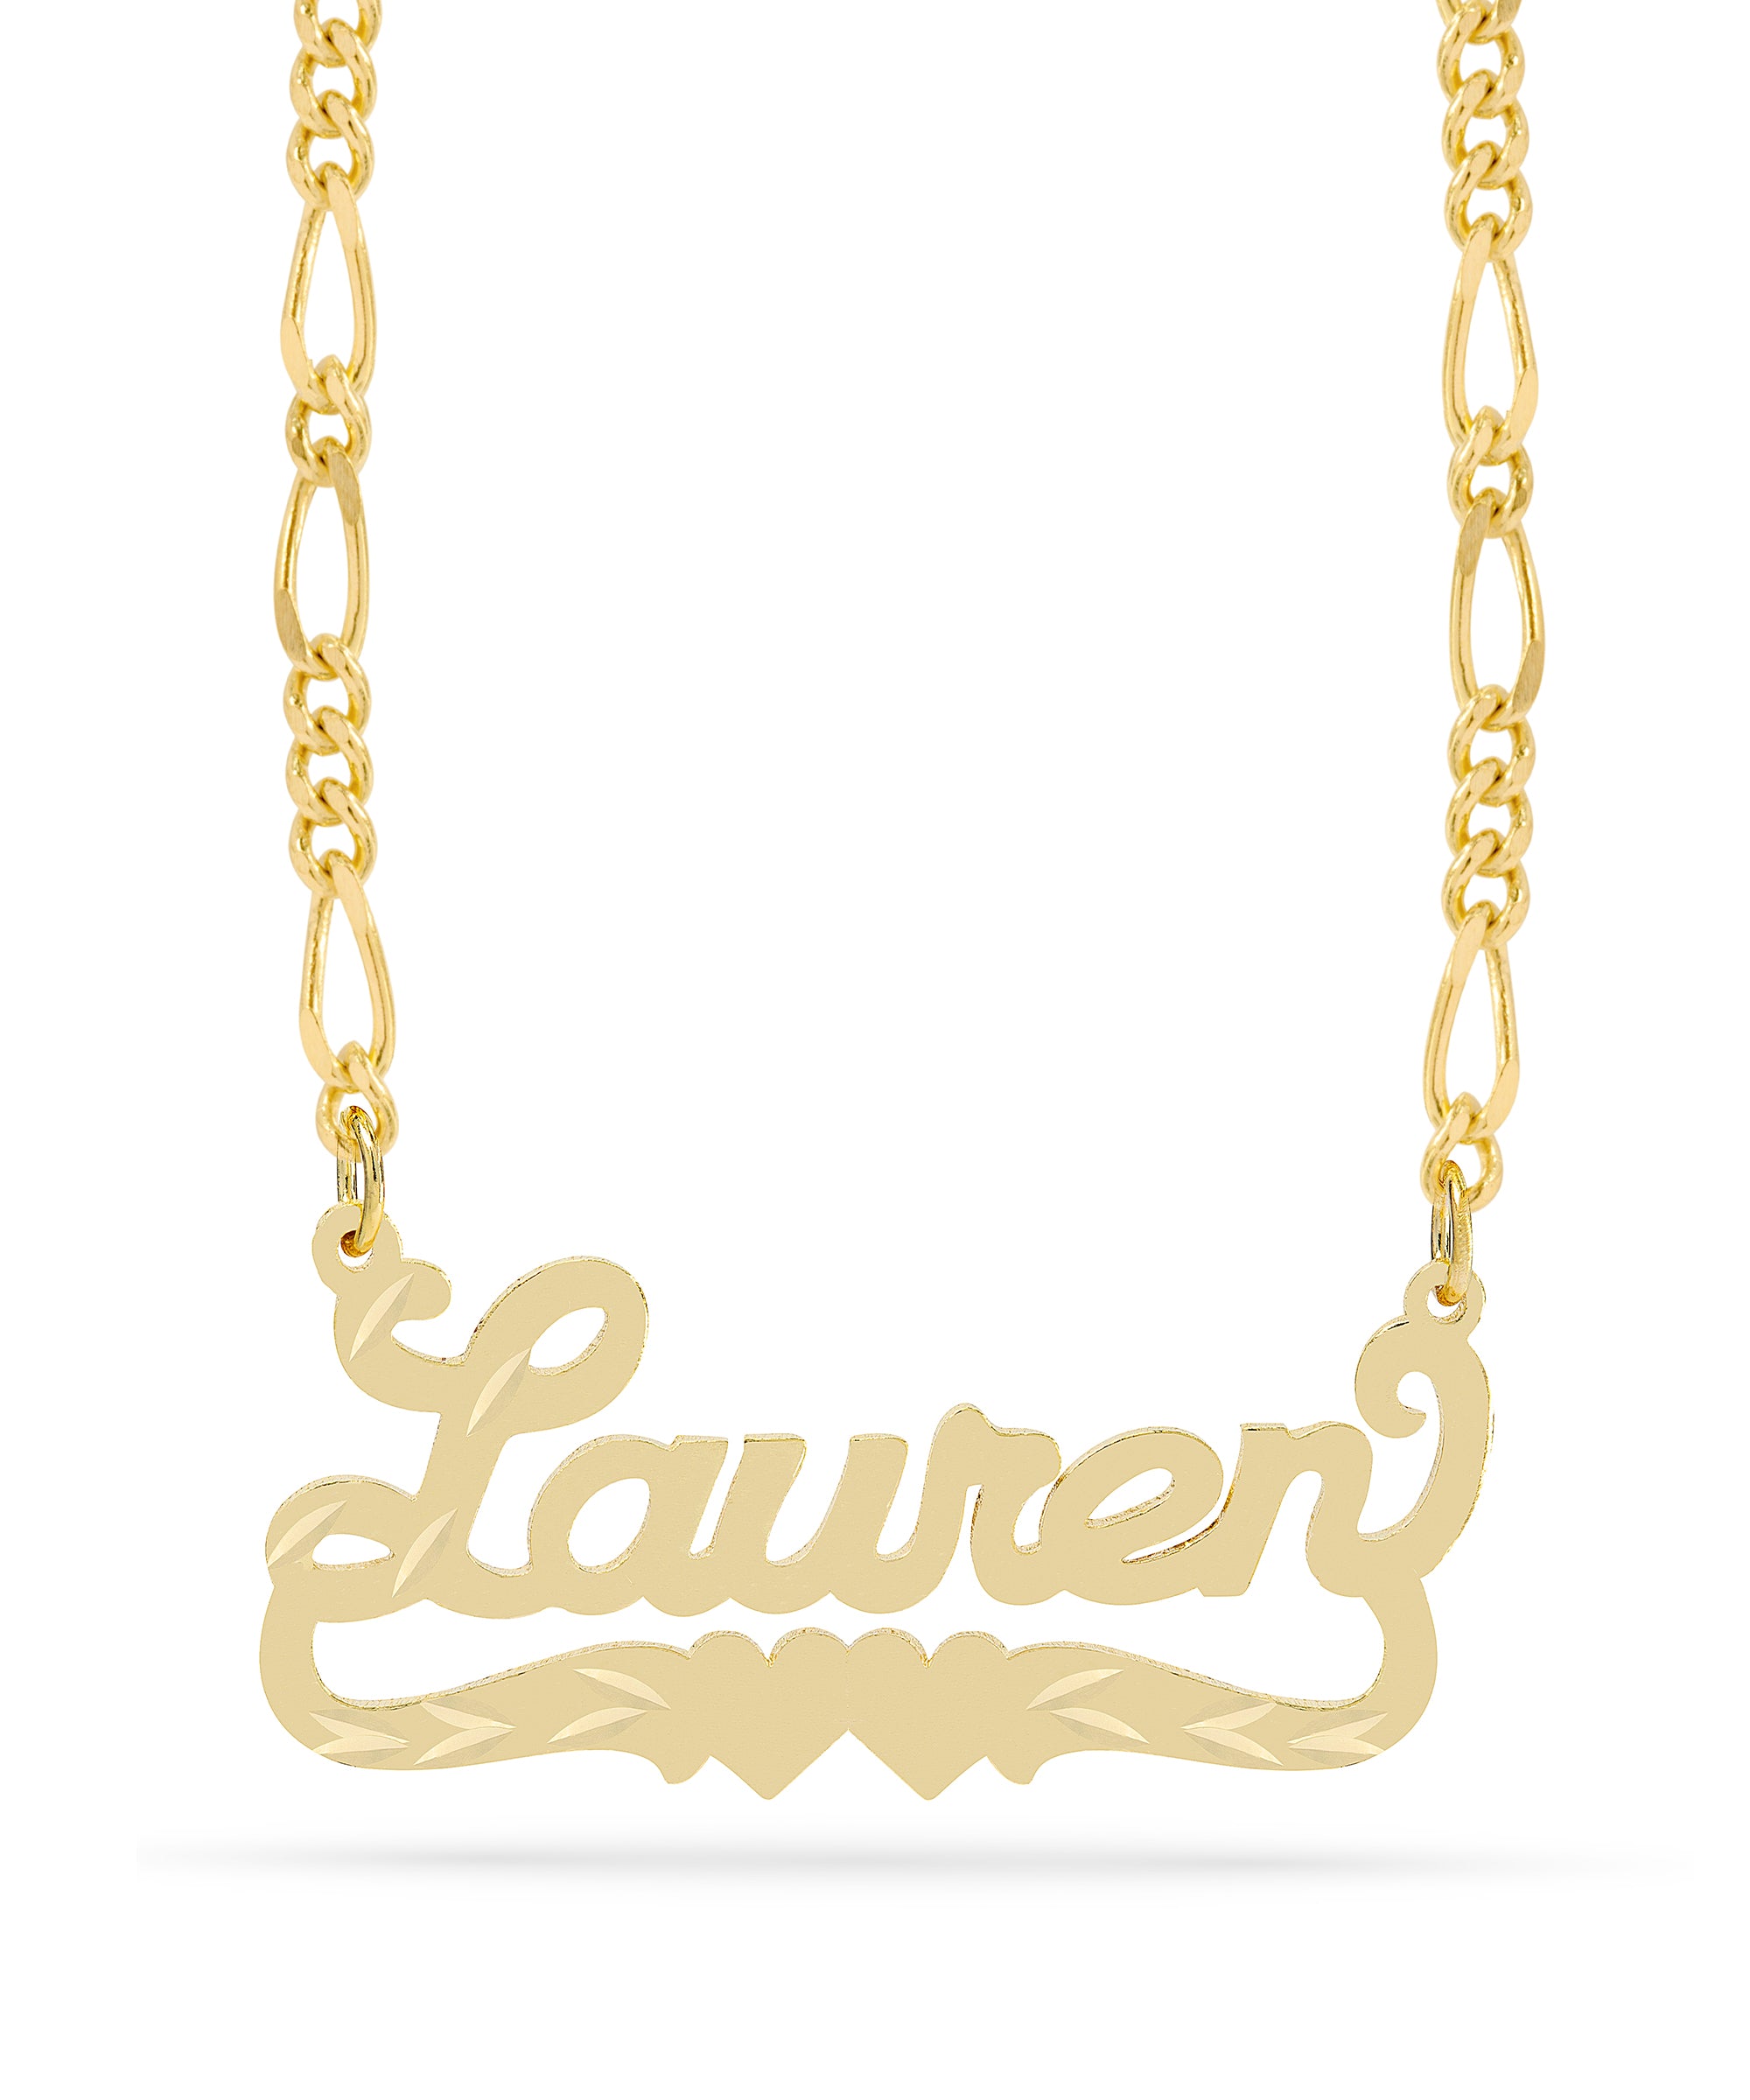 Personalized Name necklace with  Diamond Cut and Satin Finish "Lauren"